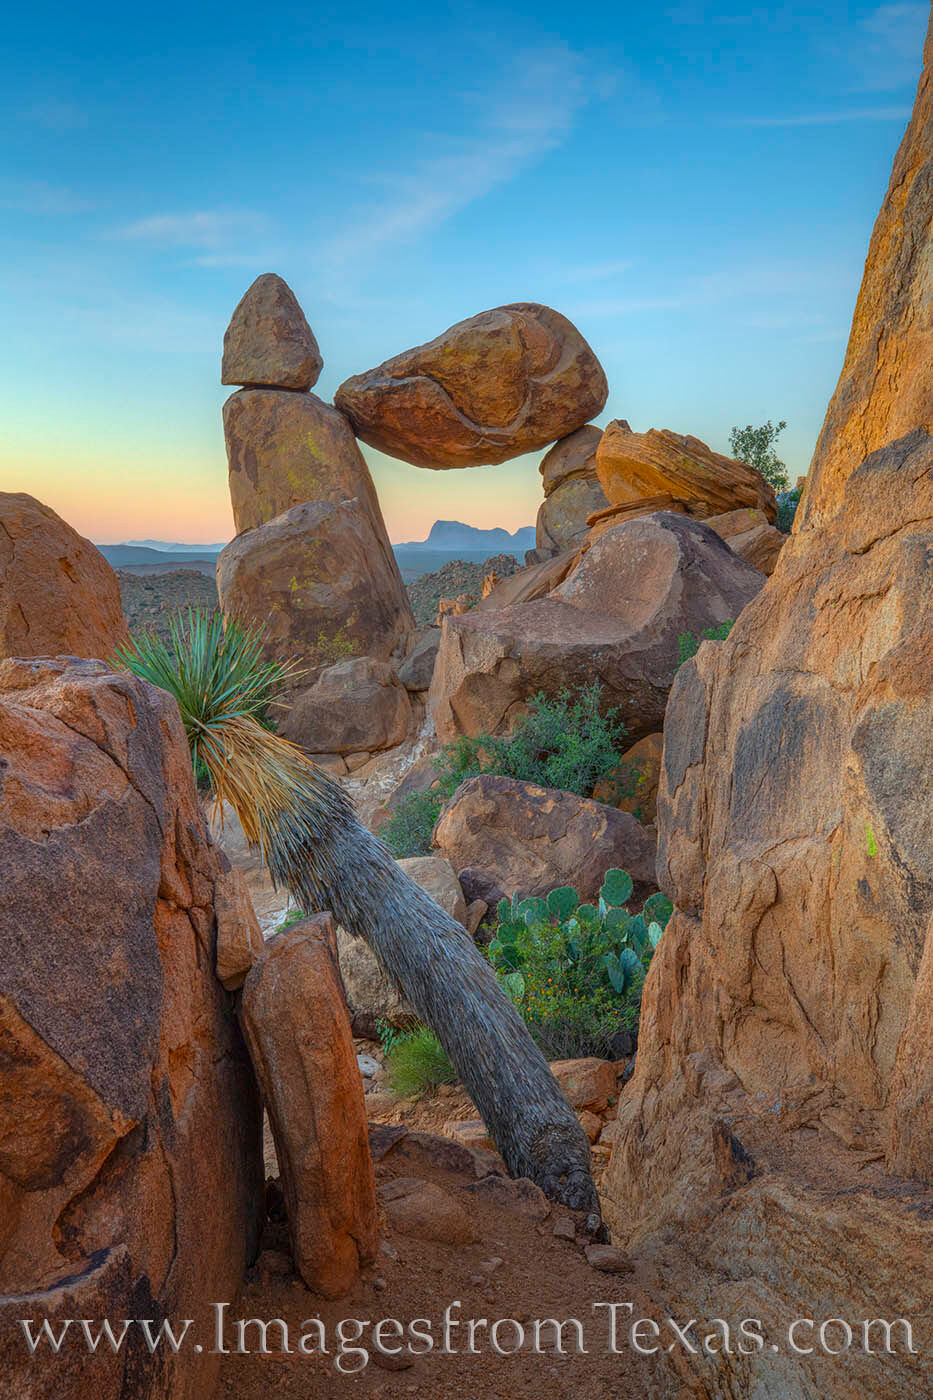 Through a few boulders, Balanced Rock comes into view. And through the opening there, distant mountains appear in the cold November...